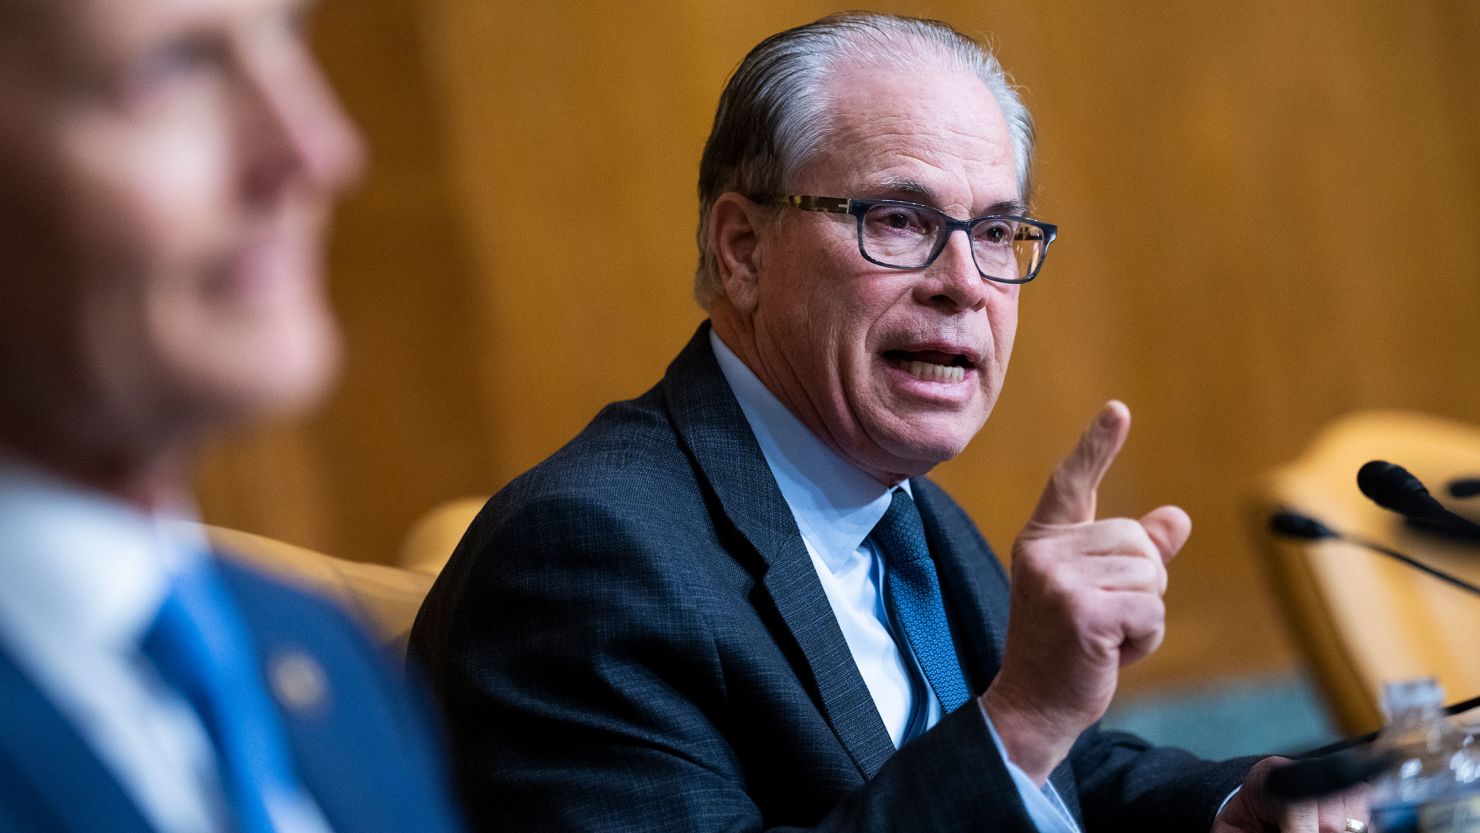 Indiana Sen. Mike Braun takes part in a Senate Budget Committee hearing on Capitol Hill in Washington, DC, on March 30, 2022.